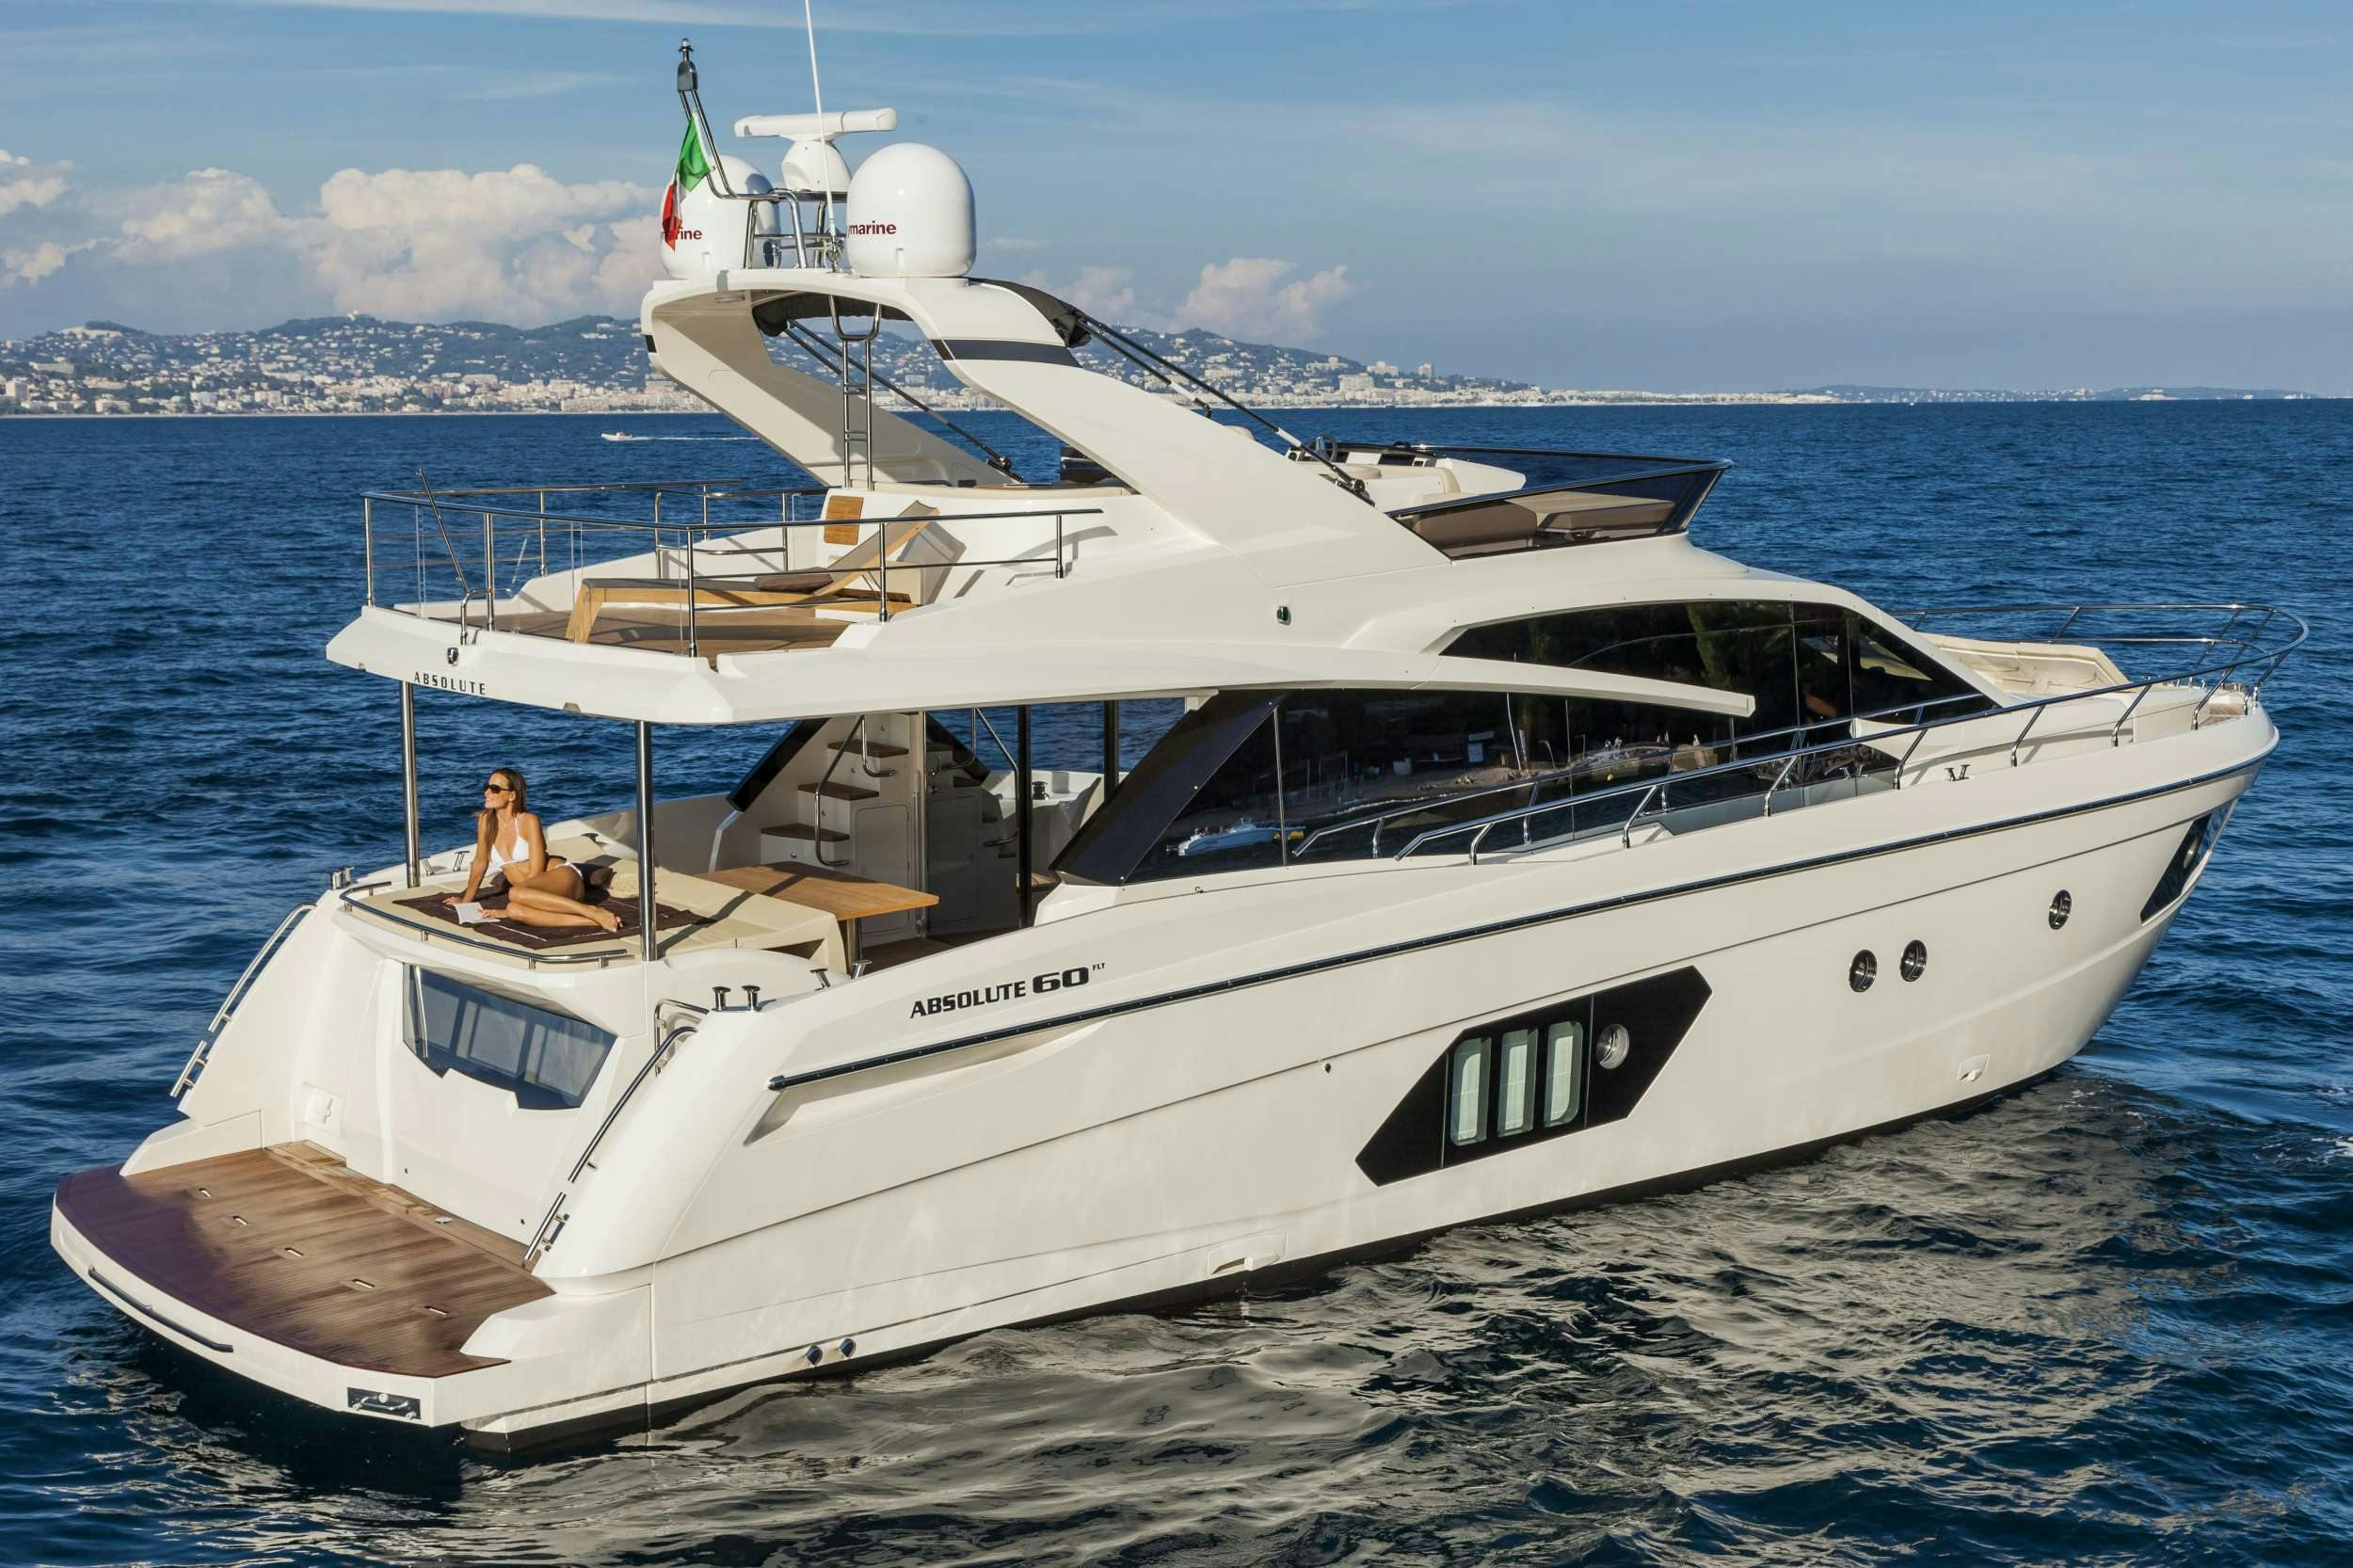 ABSOLUTE - Yacht Charter Toulon & Boat hire in Fr. Riviera, Corsica & Sardinia 1